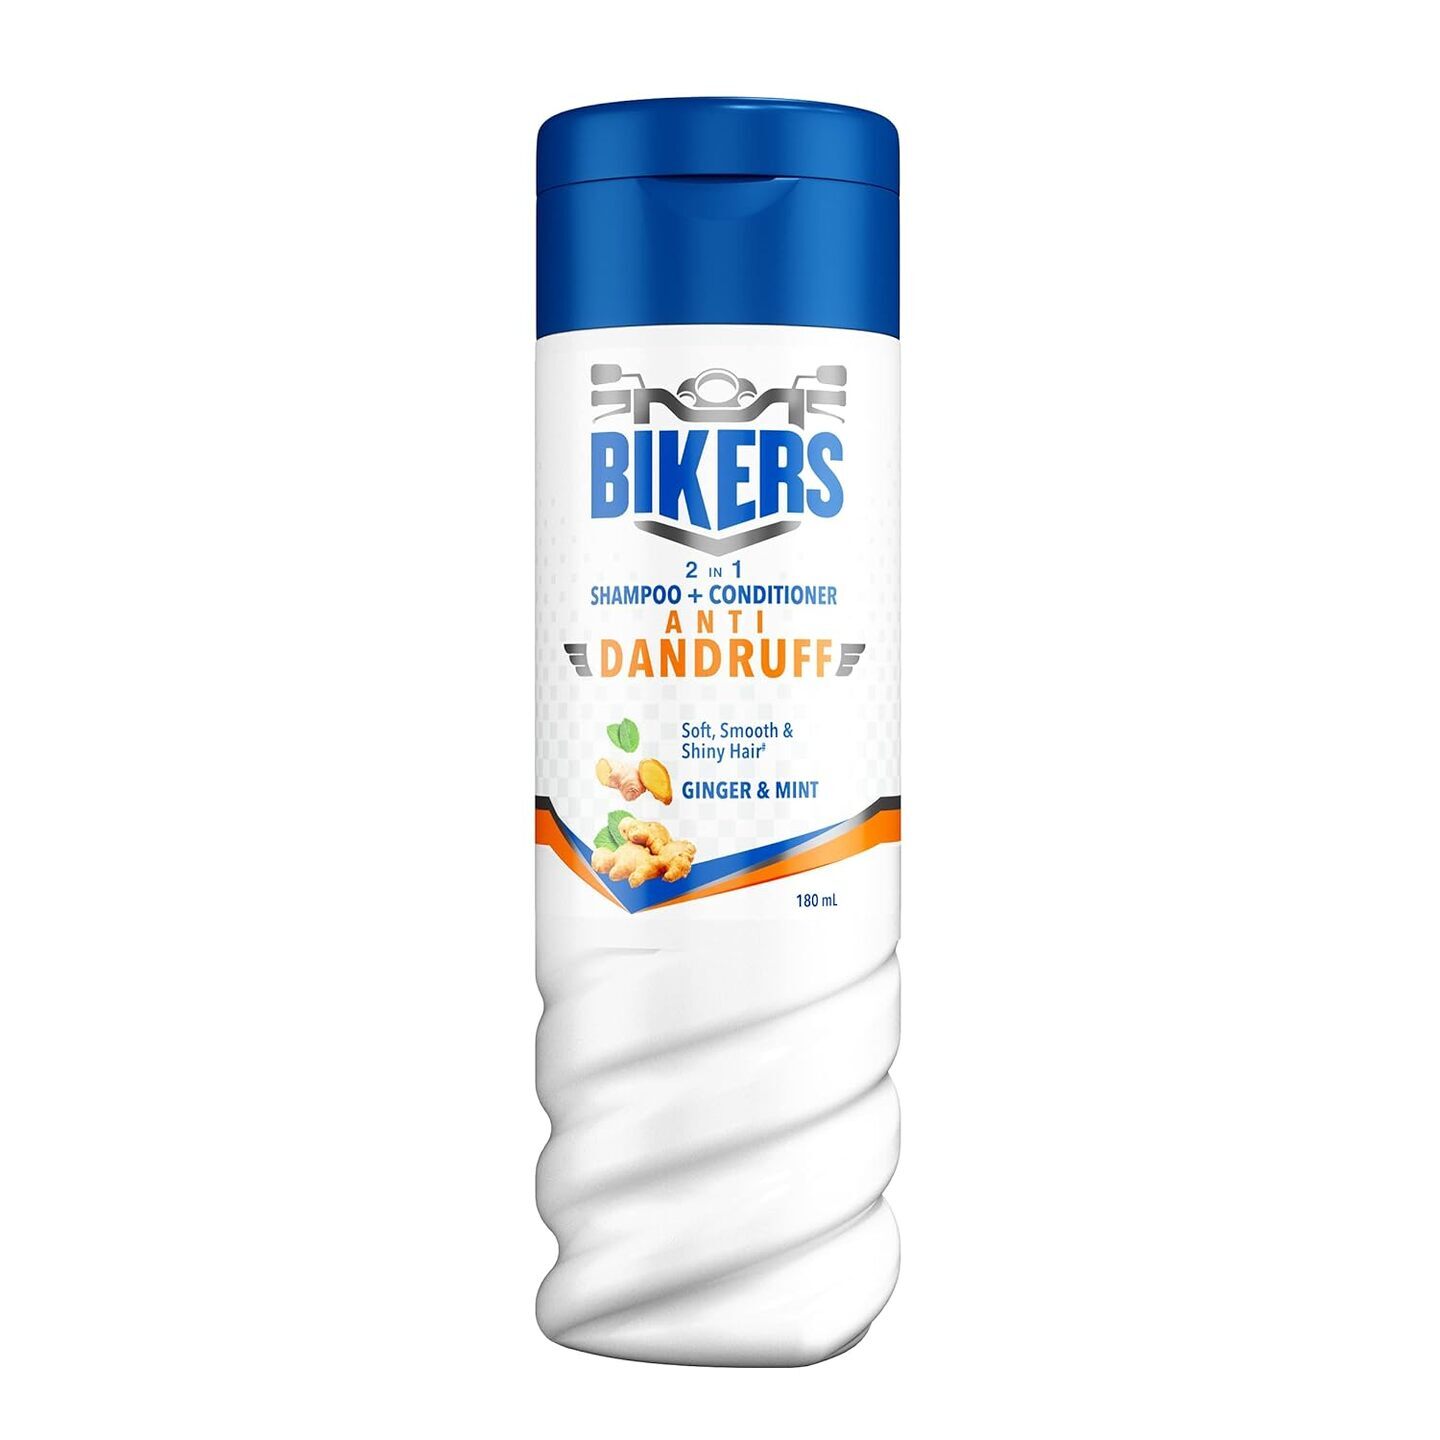 Bikers 2-in-1 Anti Dandruff Shampoo + Conditioner, Enriched with Ginger and Mint for Soft Smooth Shiny and Conditioned Hair, Shampoo for Men